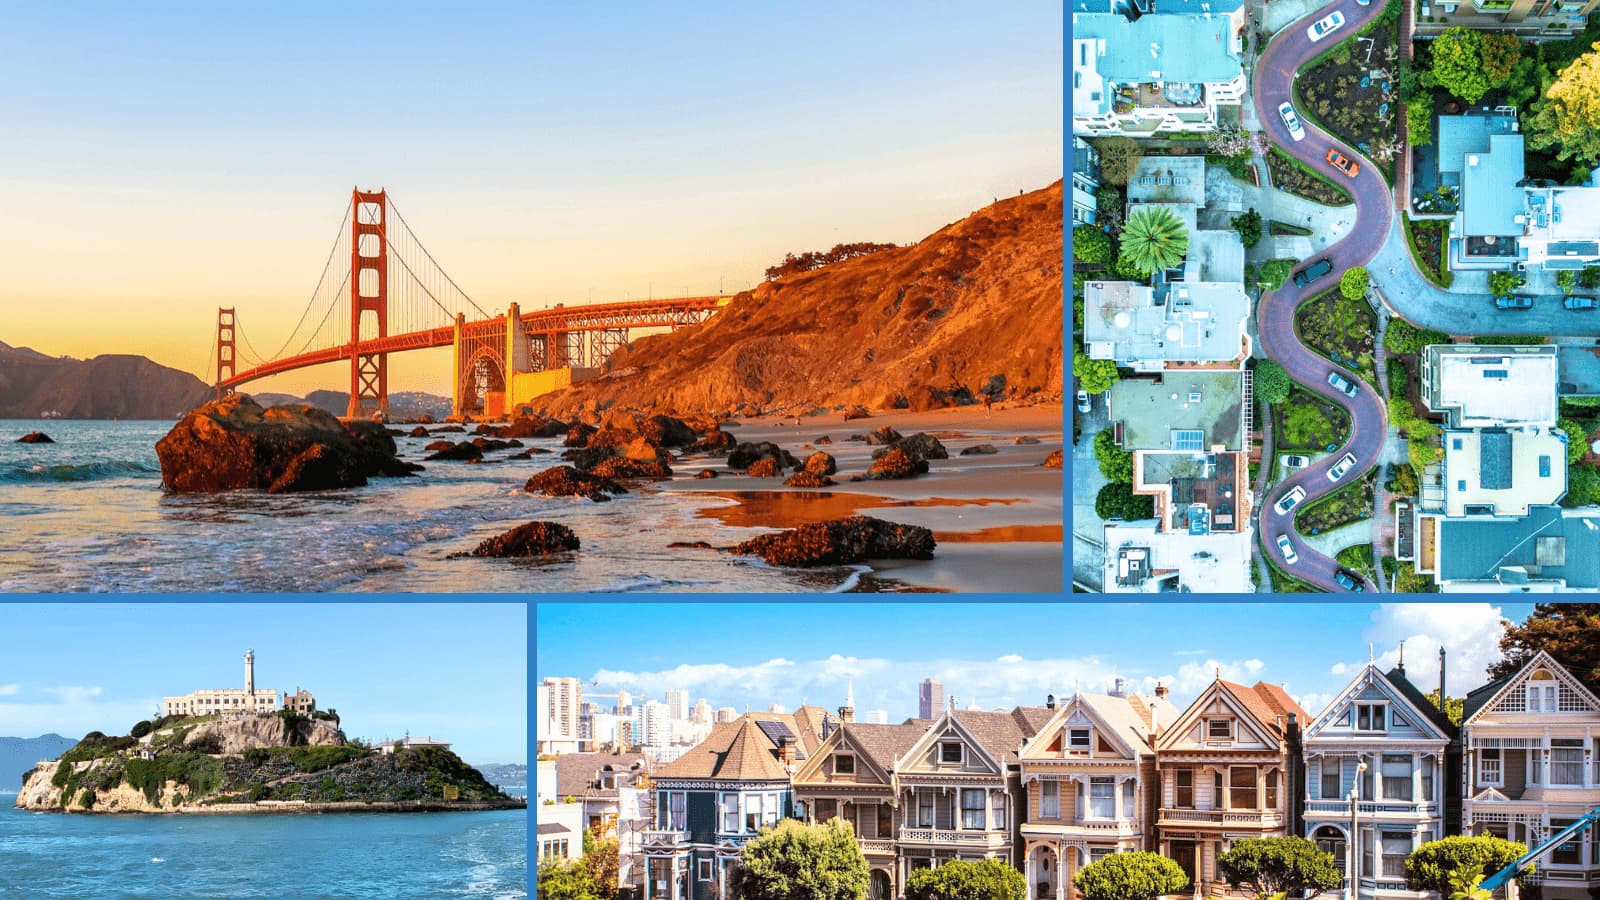 Top San Francisco attractions including the Golden Gate Bridge, Alcatraz Island, Lombard Street and the Painted Ladies of Alamo Square